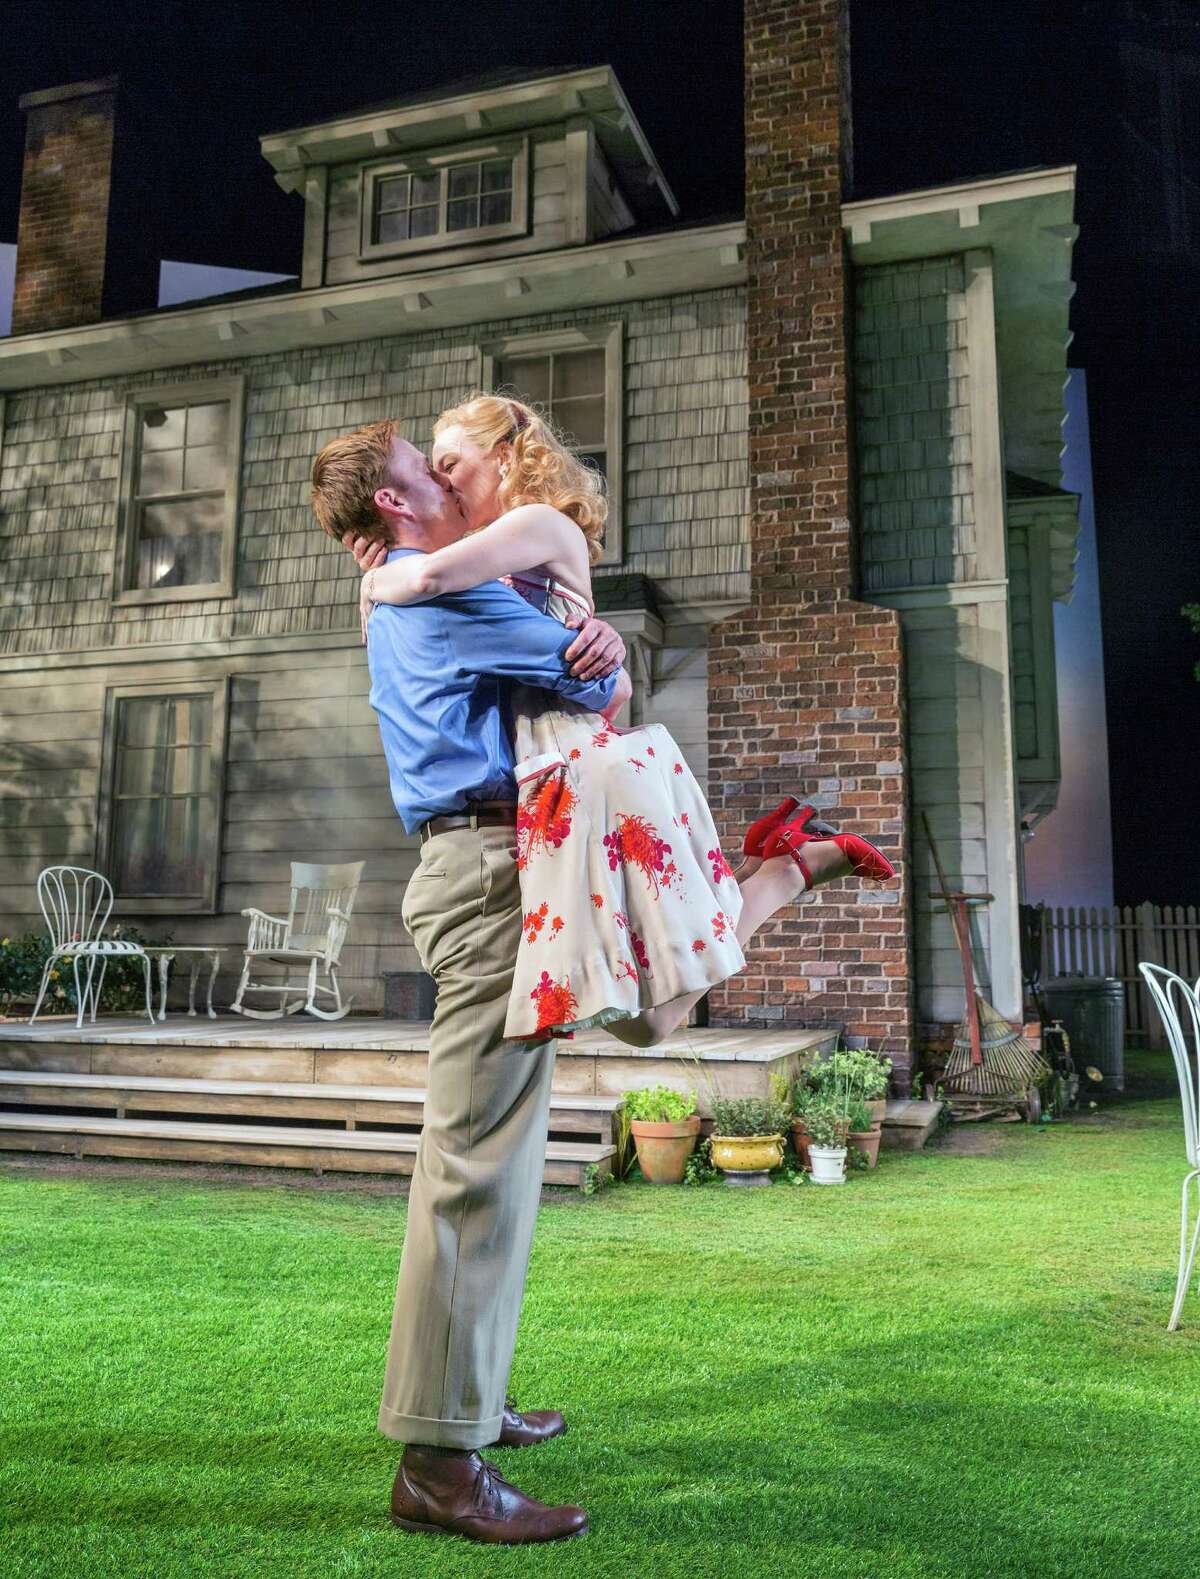 Jay Sullivan and Elizabeth Bunch star in ﻿Alley Theatre's production of Arthur Miller's ﻿"All My Sons."﻿